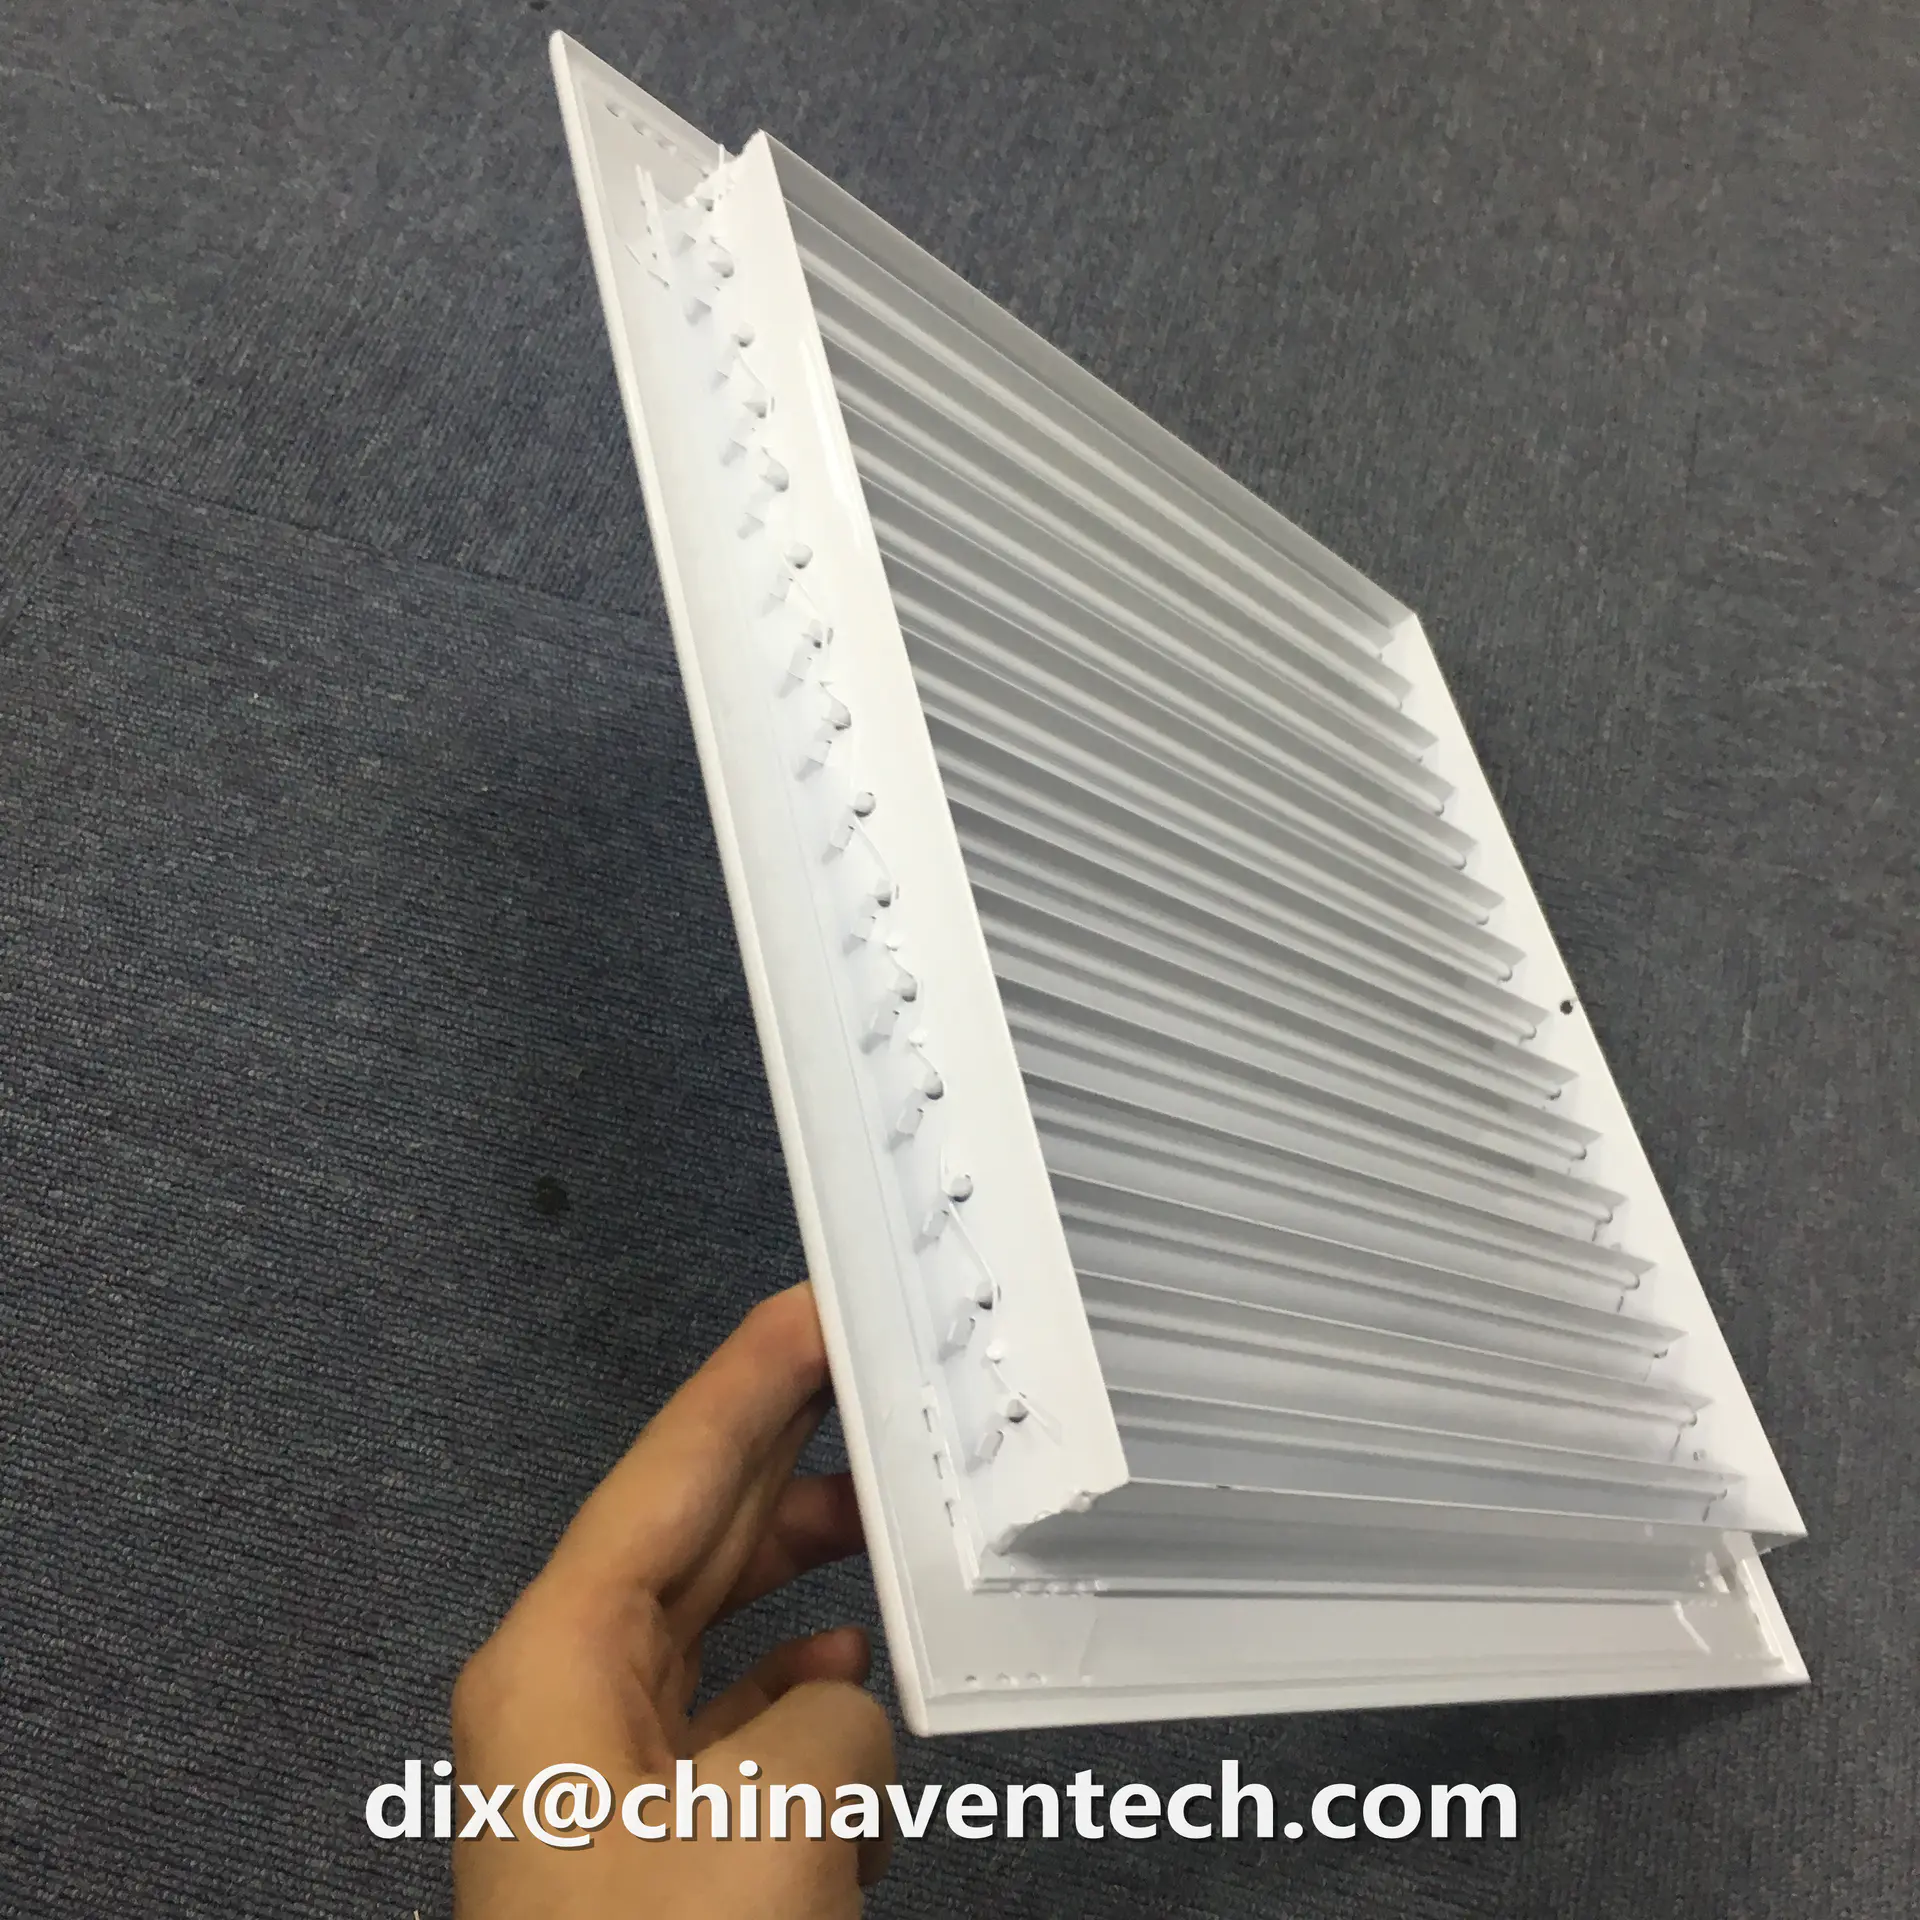 Hvac Fan Aluminum Ventilation Air Wall Vent Conditioning Exhaust Supply Fresh Air Return Grille